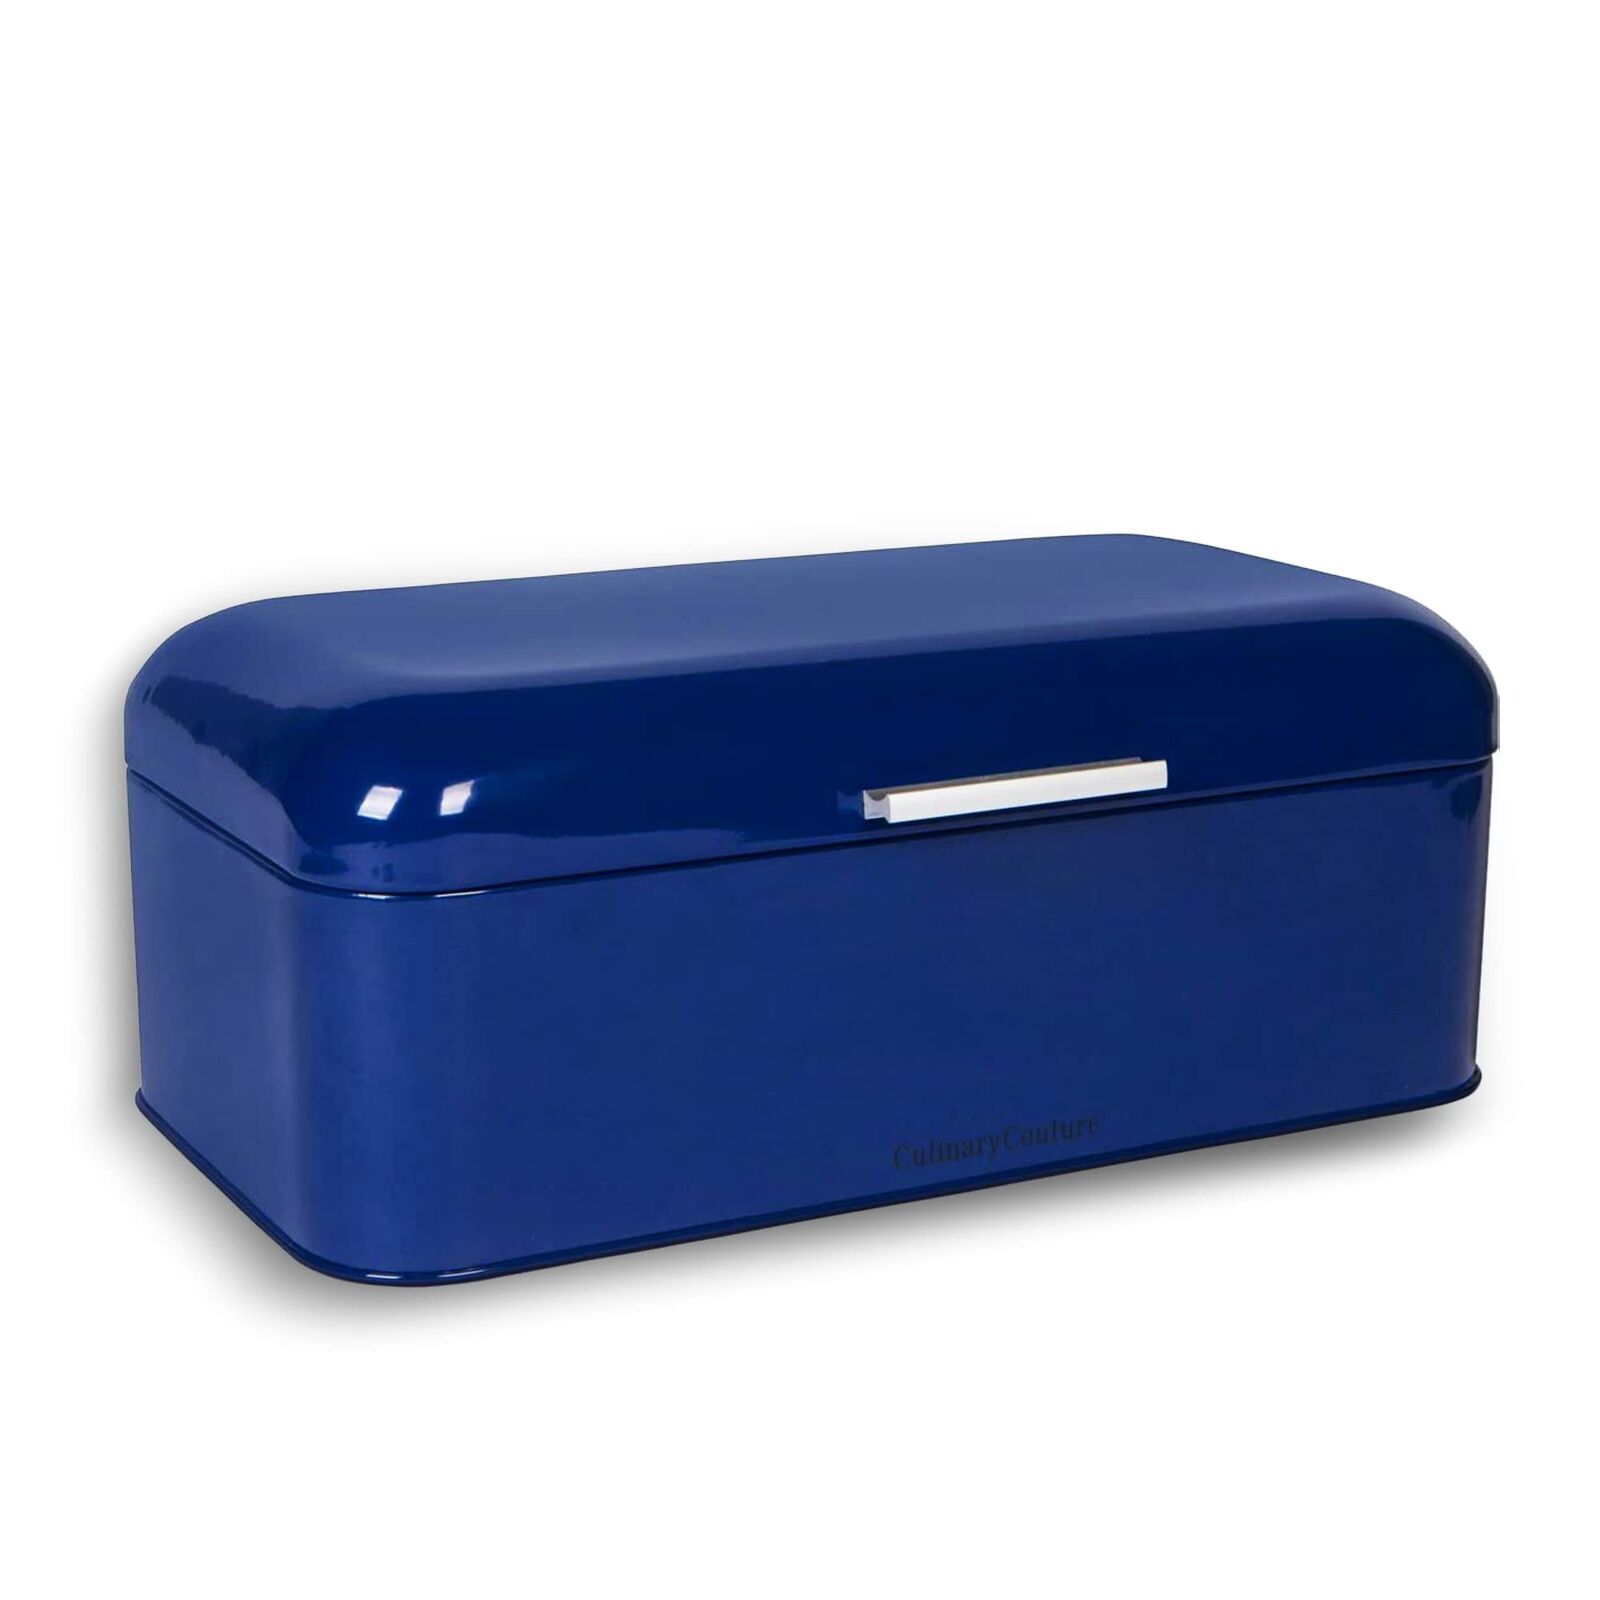 Culinary Couture Extra Large Blue Bread Box for Kitchen Countertop - Holds 2 ...